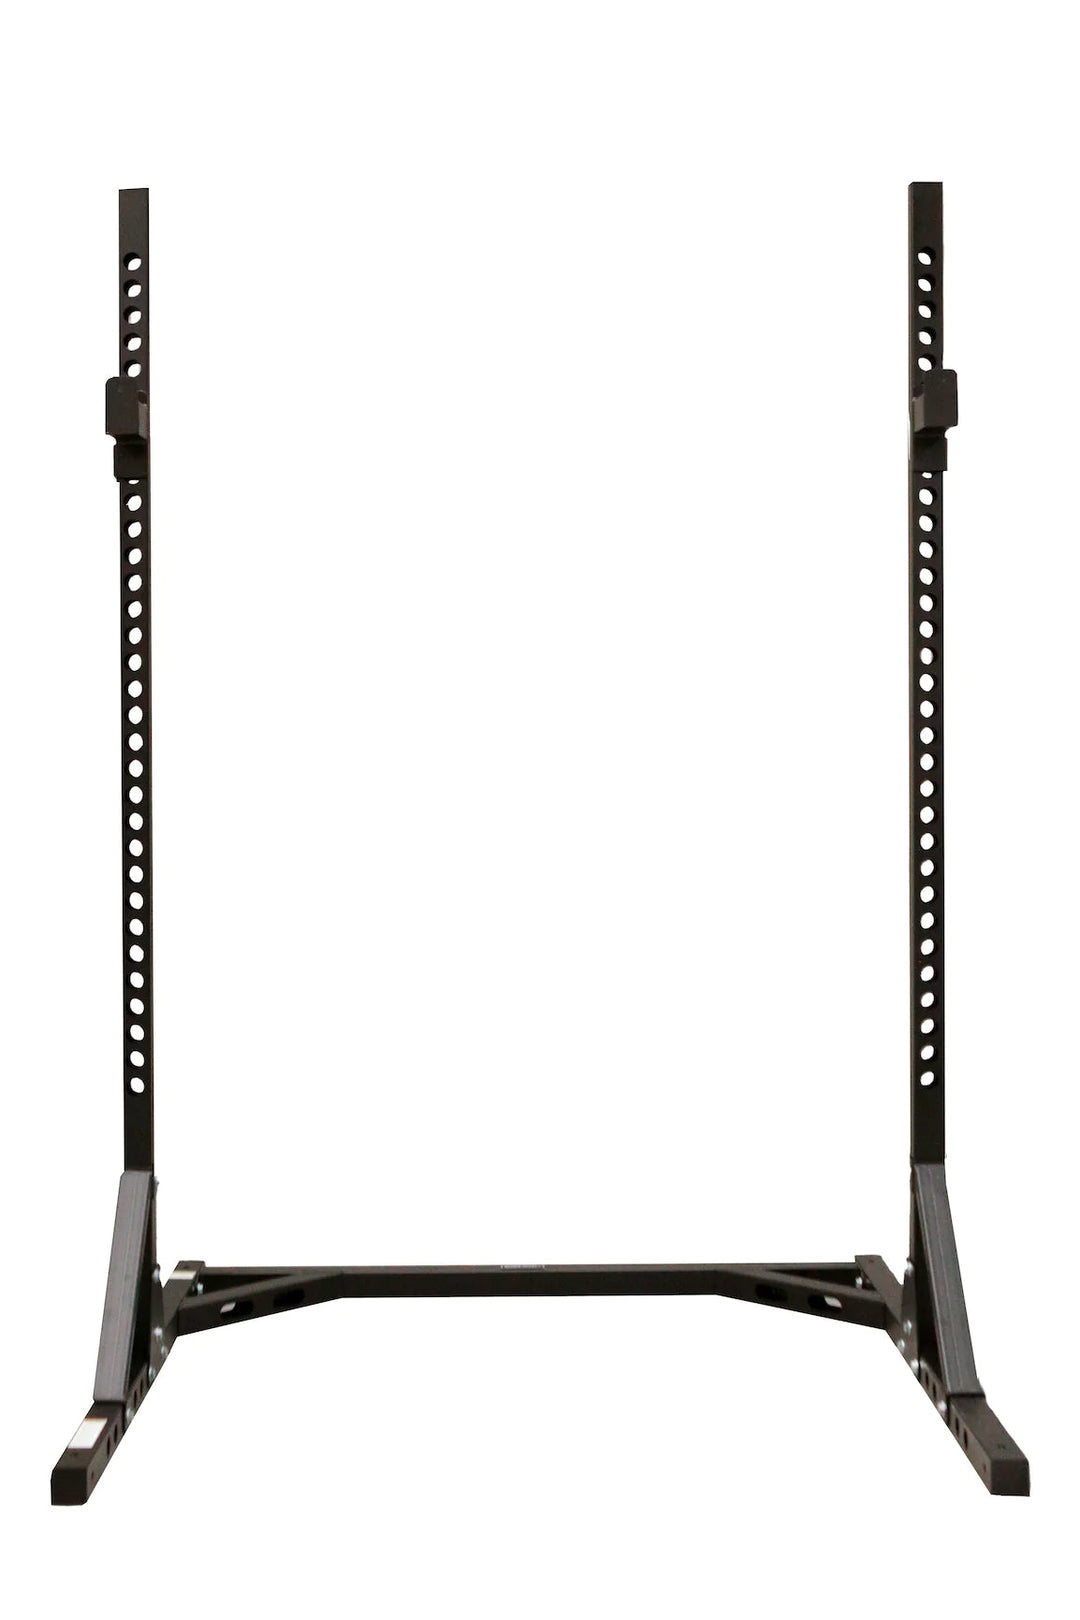 Body Iron Squat Stand Reinforced E2 Set + Everlast Incline Utility Bench